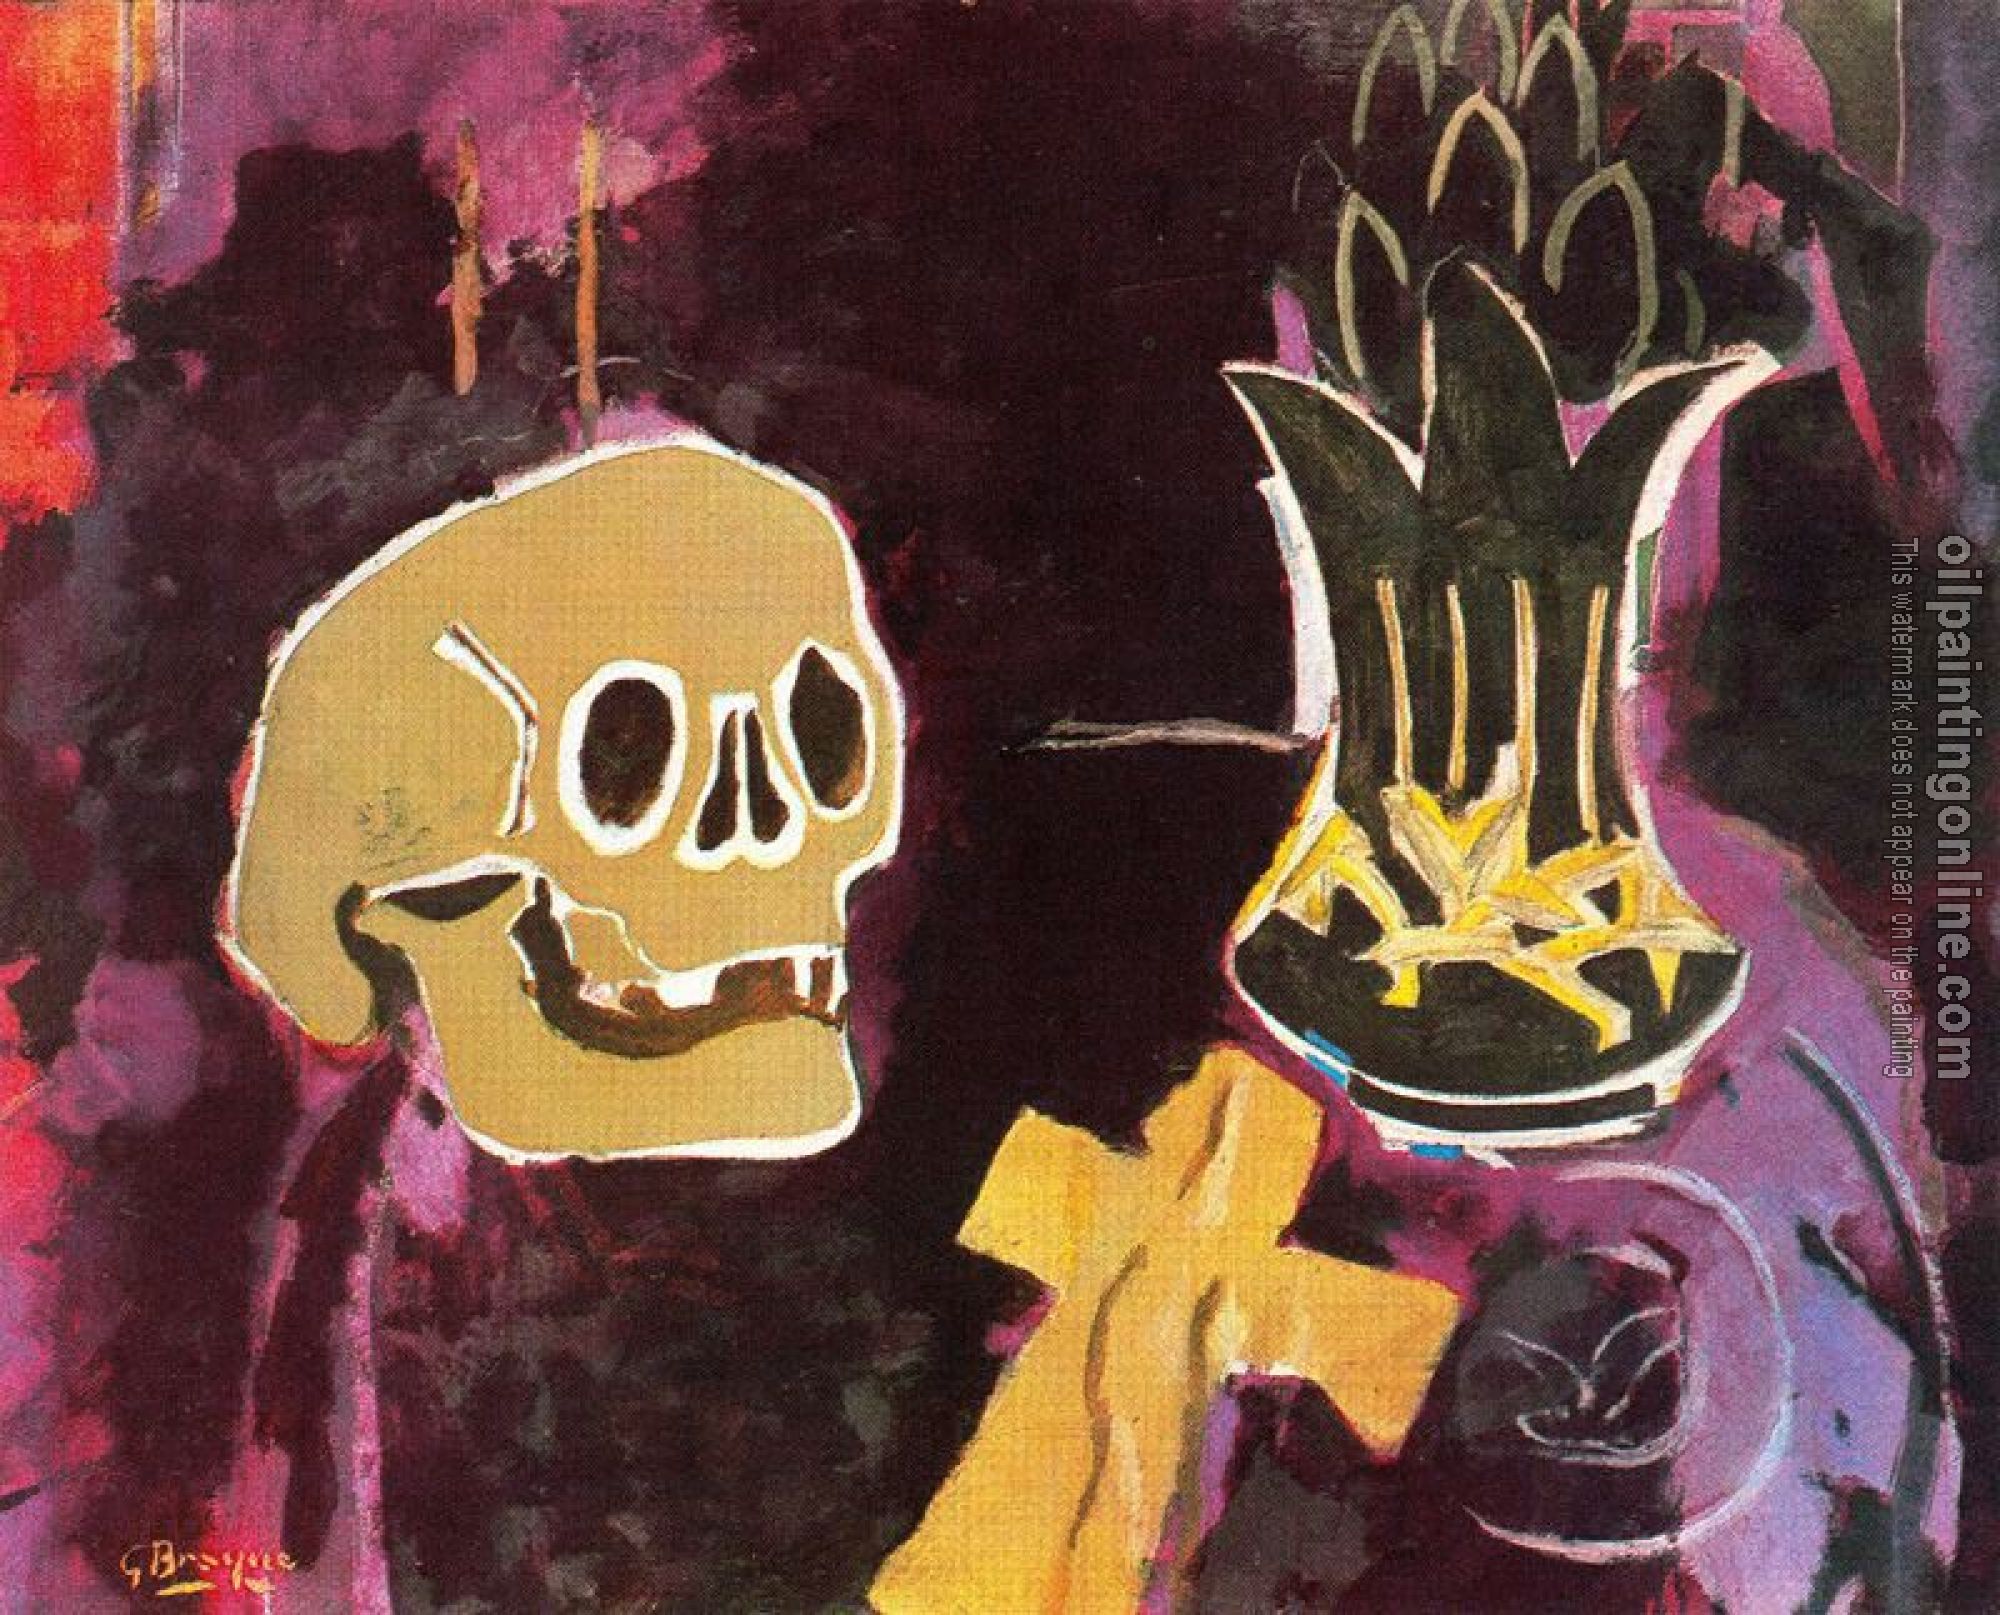 Georges Braque - Still life with skull